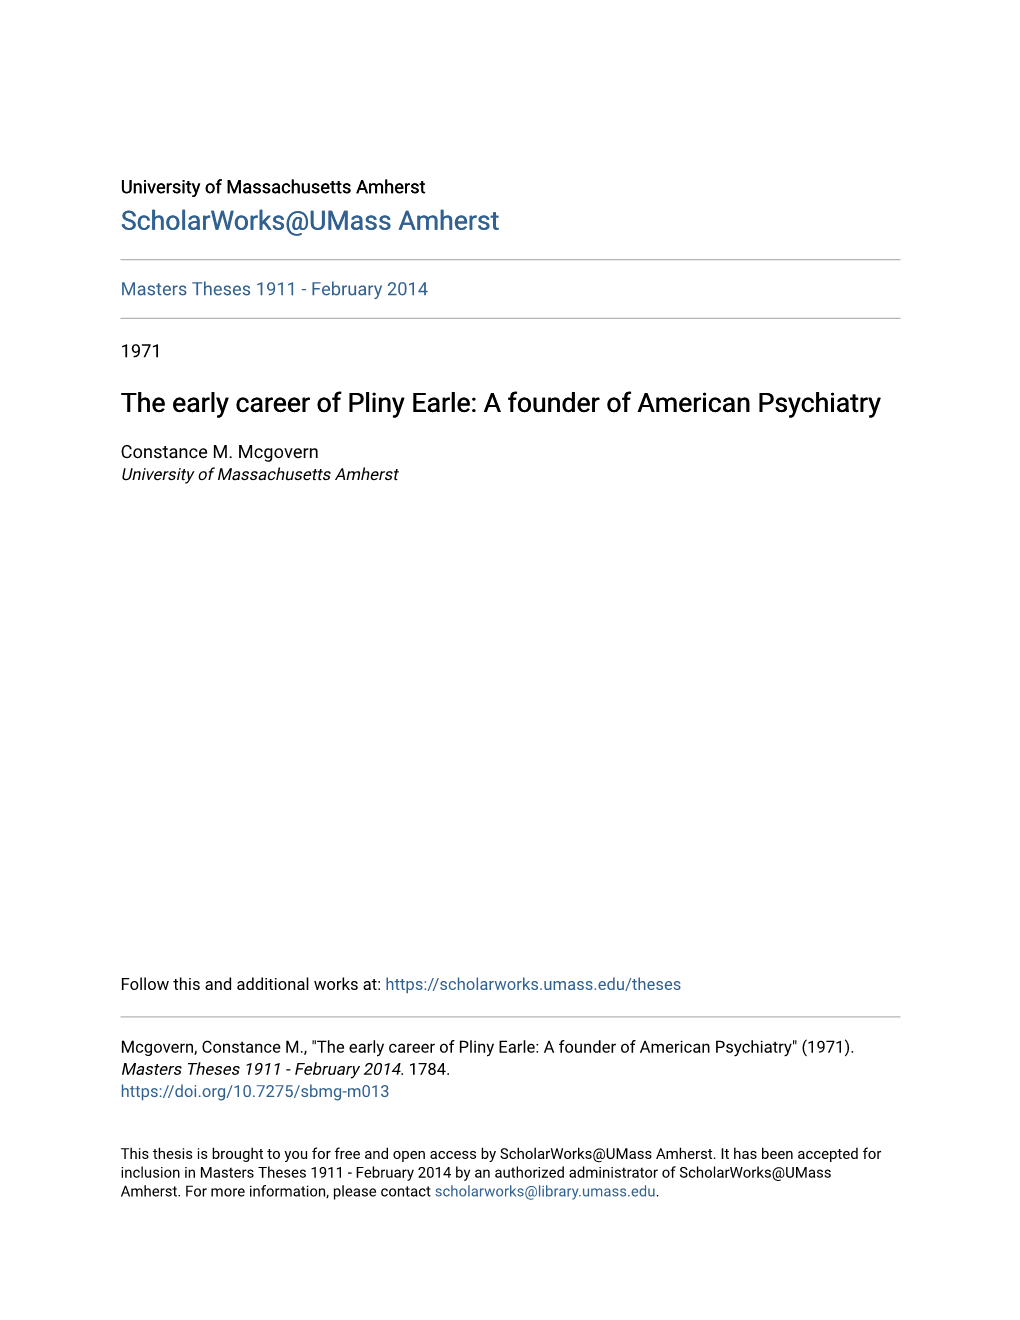 The Early Career of Pliny Earle: a Founder of American Psychiatry